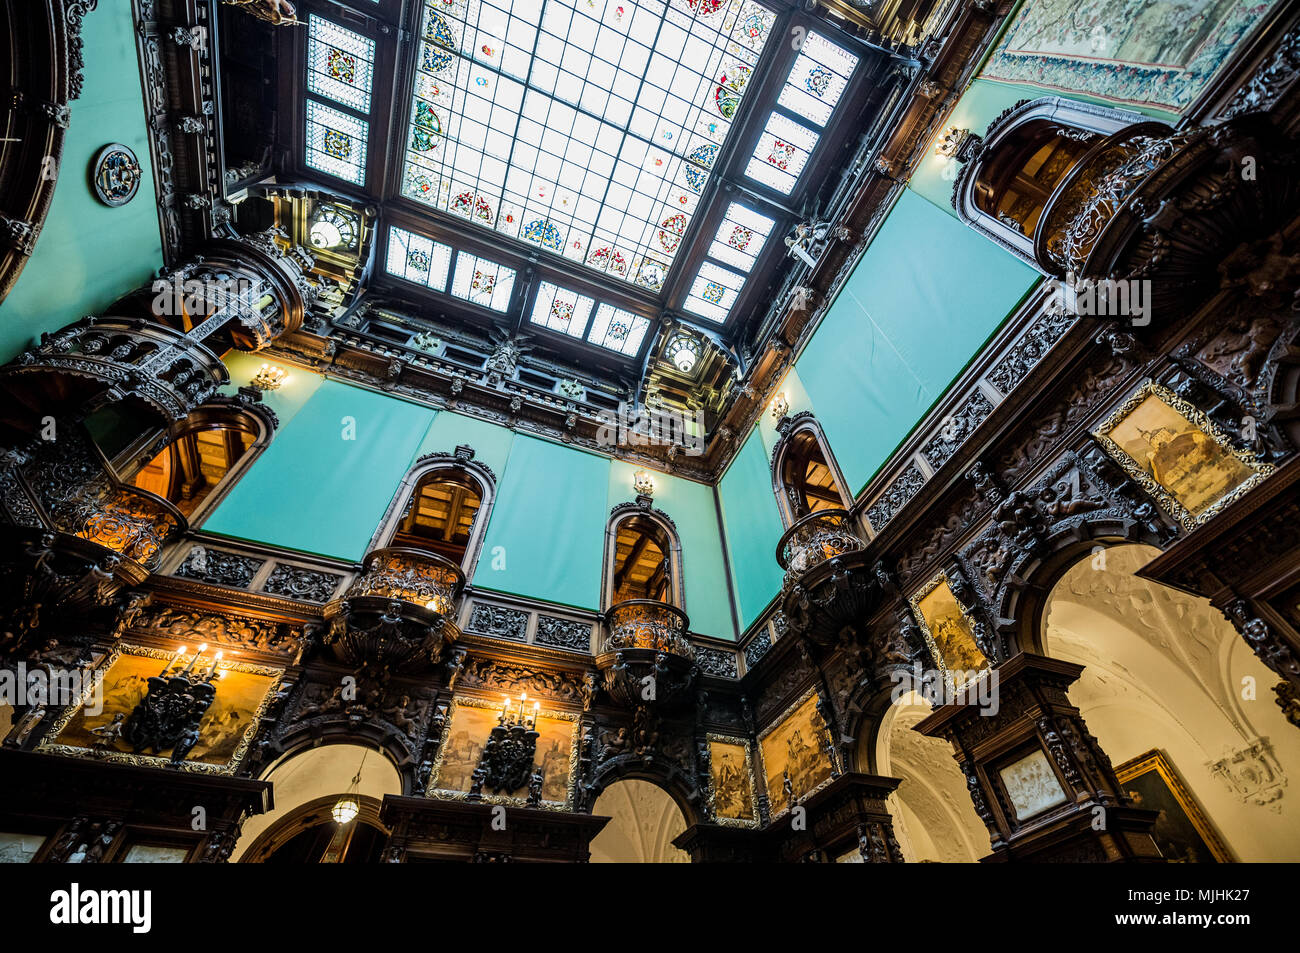 Hall of Honour (Holul de Onoare) and glass ceiling in Peles Palace, former royal castle, built between 1873 and 1914, located near Sinaia in Romania Stock Photo